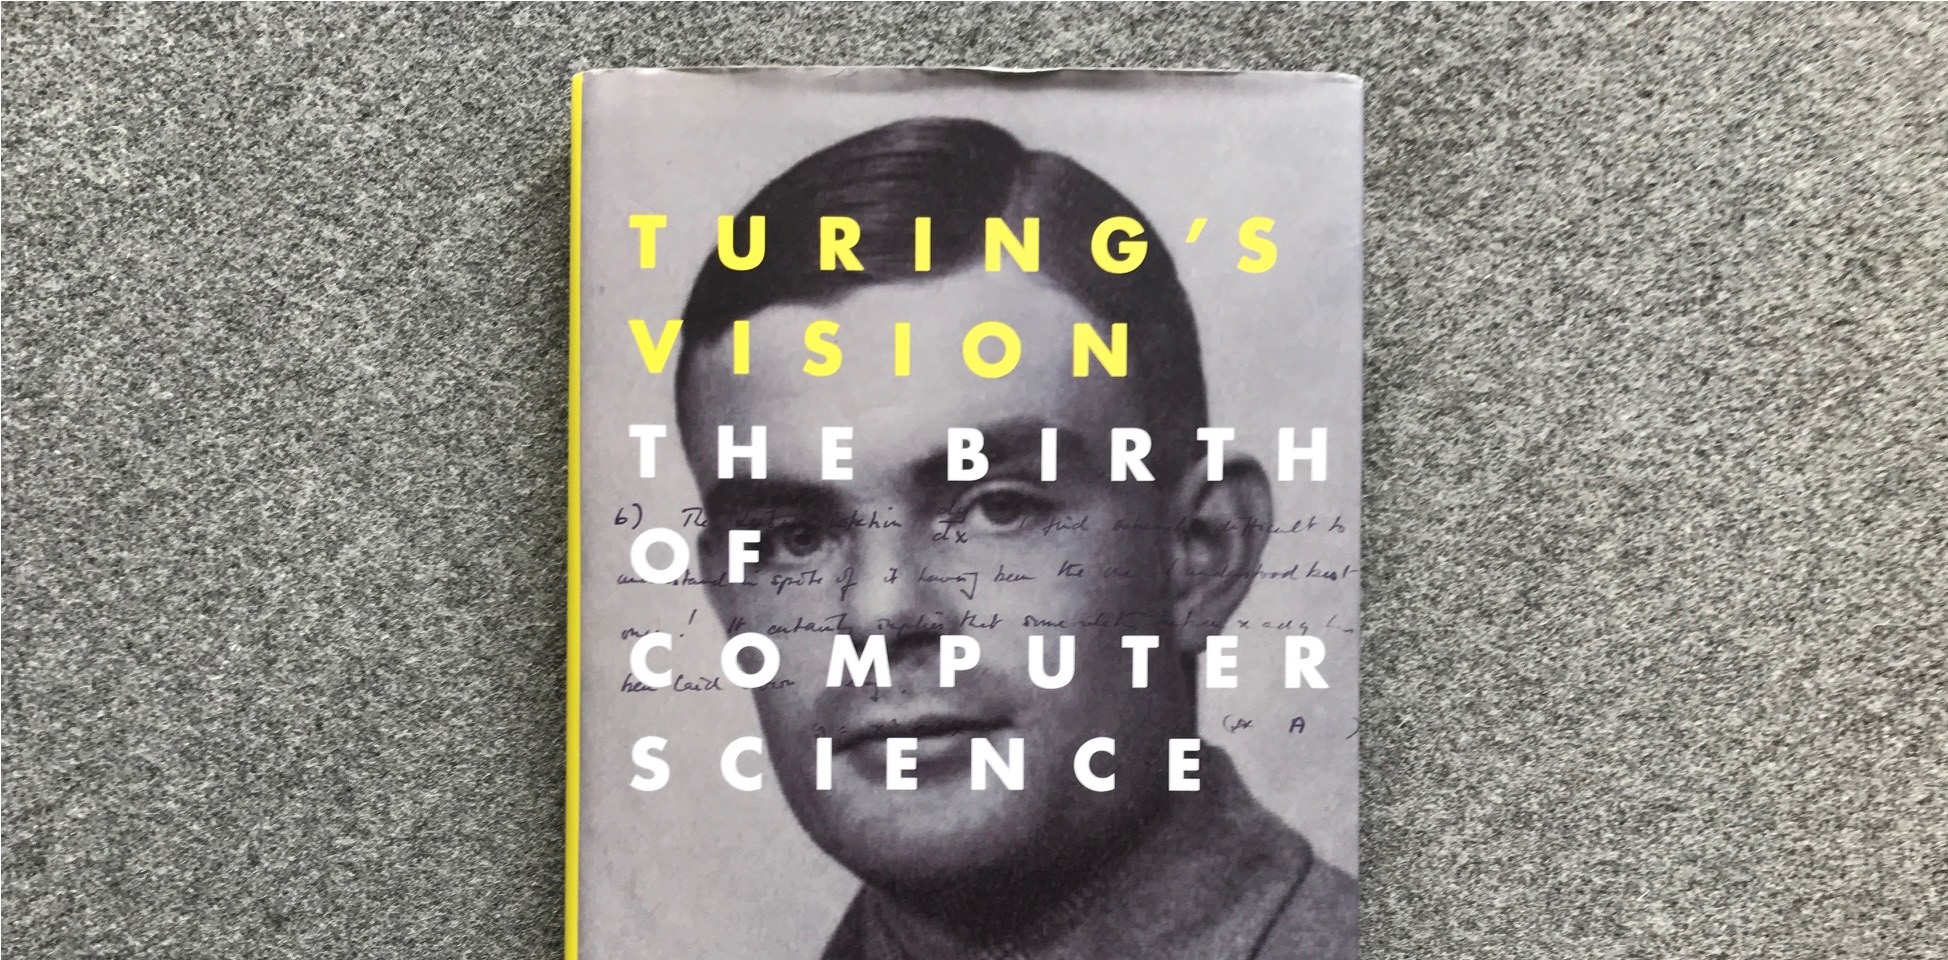 Book with Alan Turing on the cover, title: Turing's vision: the birth of computer science